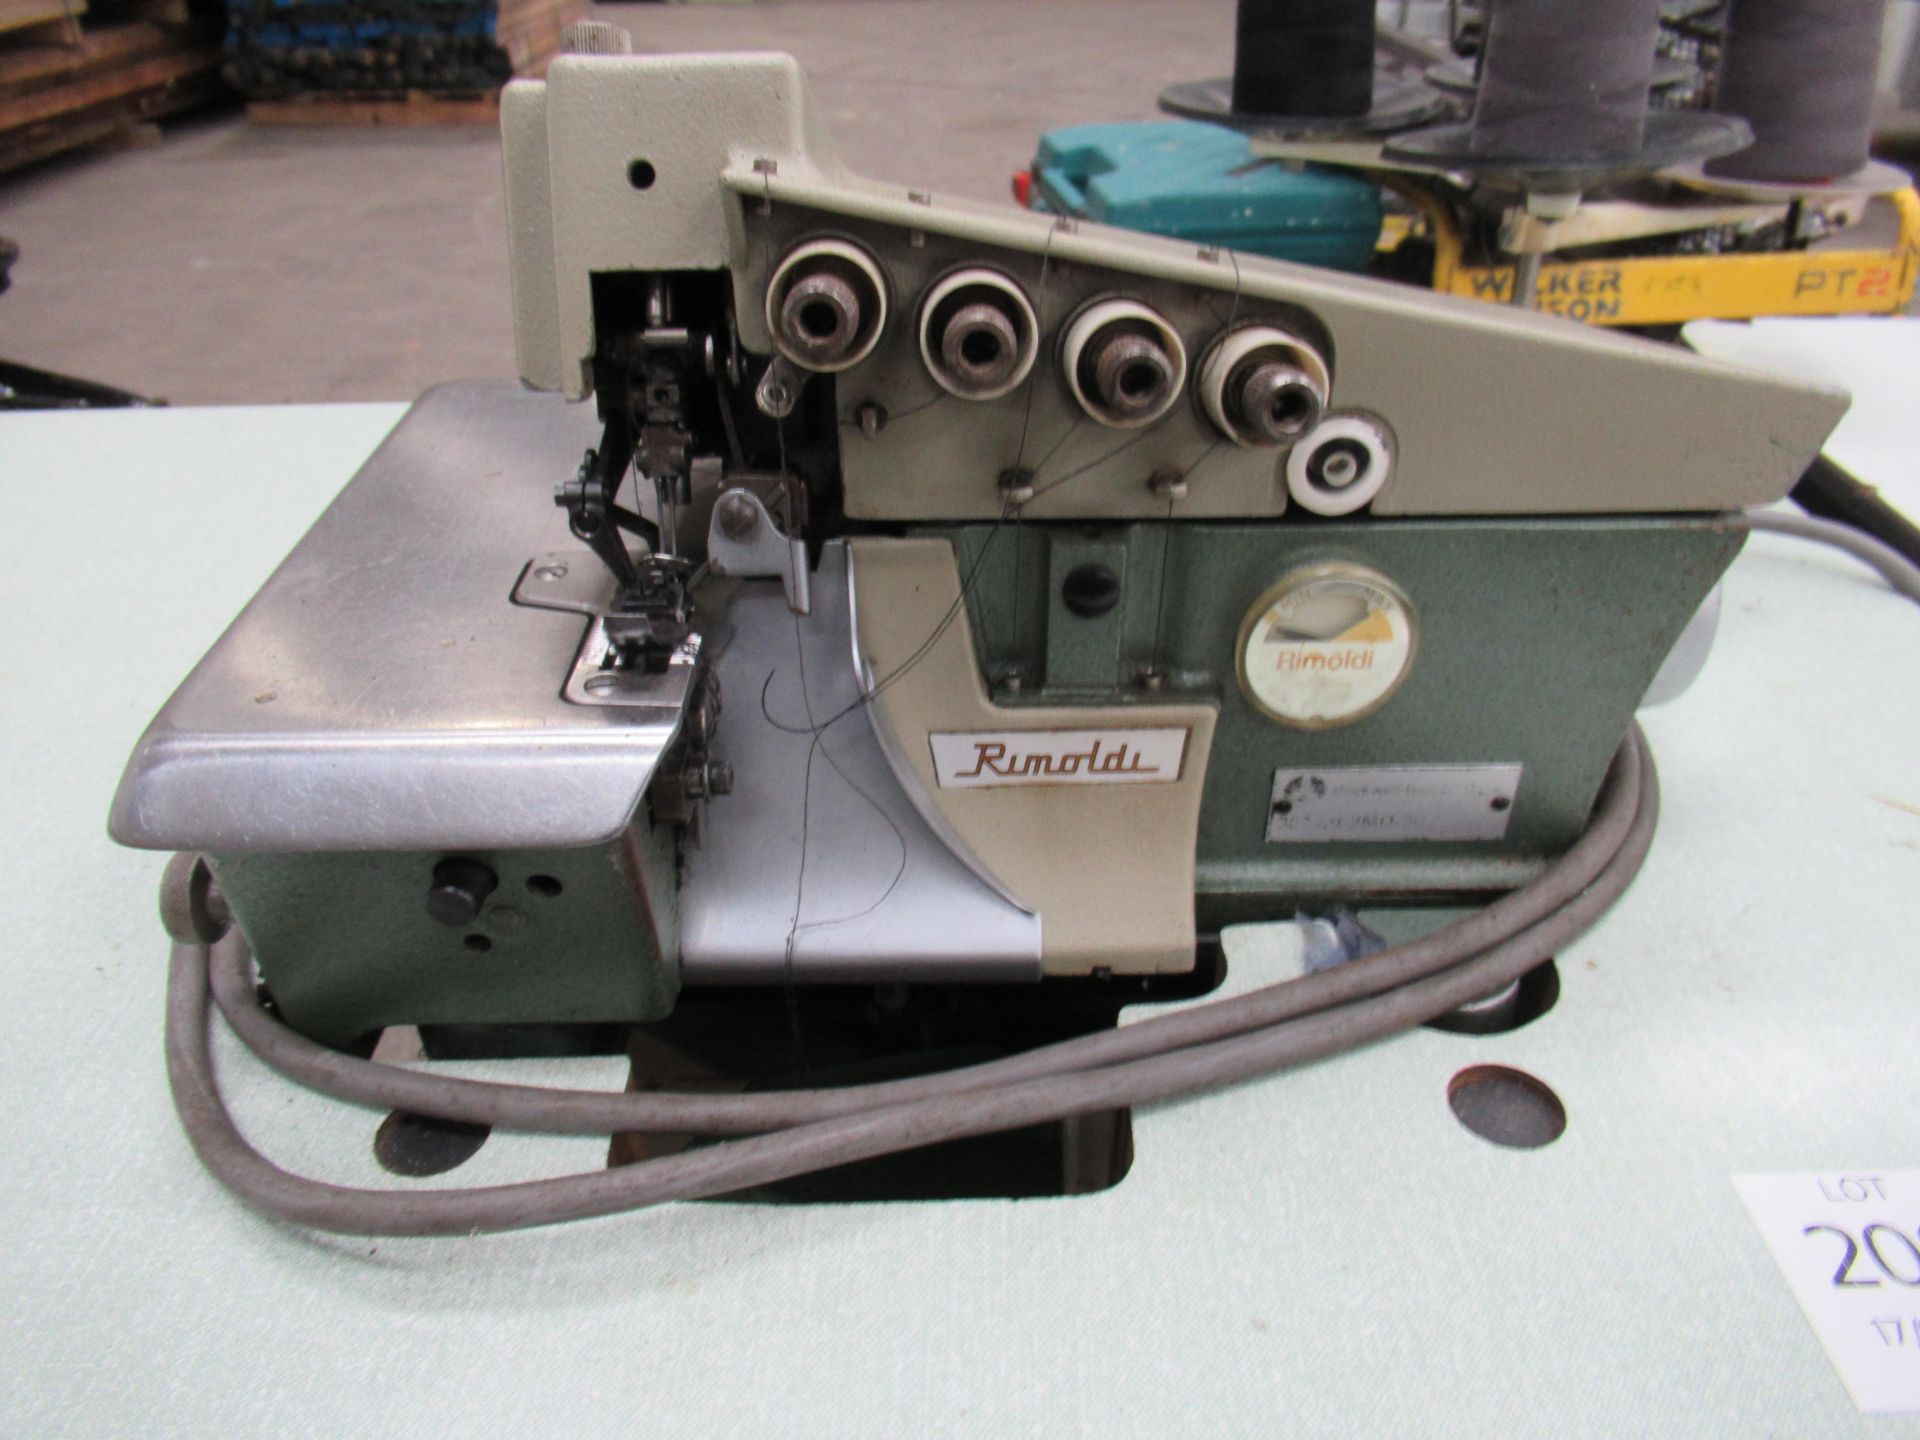 Rimoldi industrial sewing machine. Please note there is a lift out fee of £5 plus VAT on this lot - Image 4 of 6